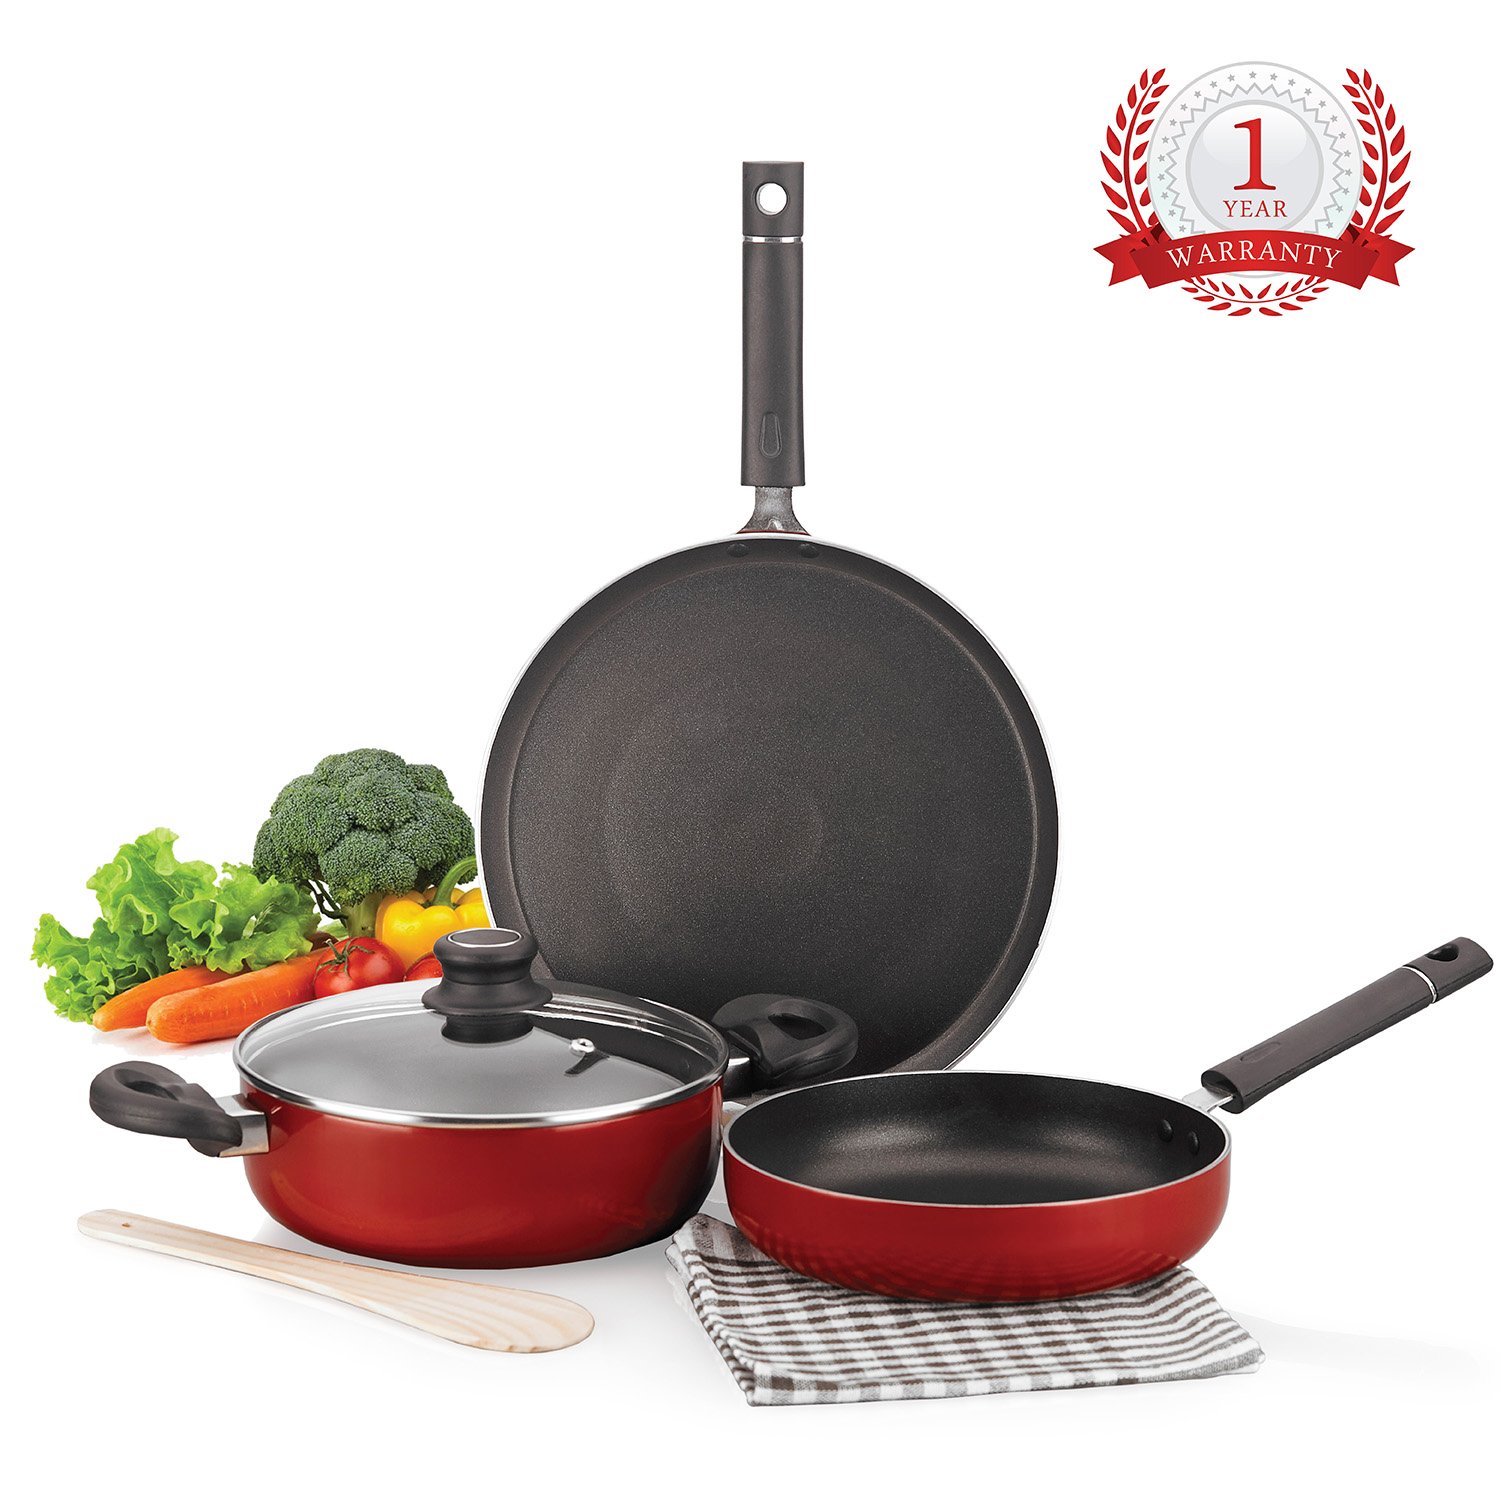 The Iconic Three Set Cookware